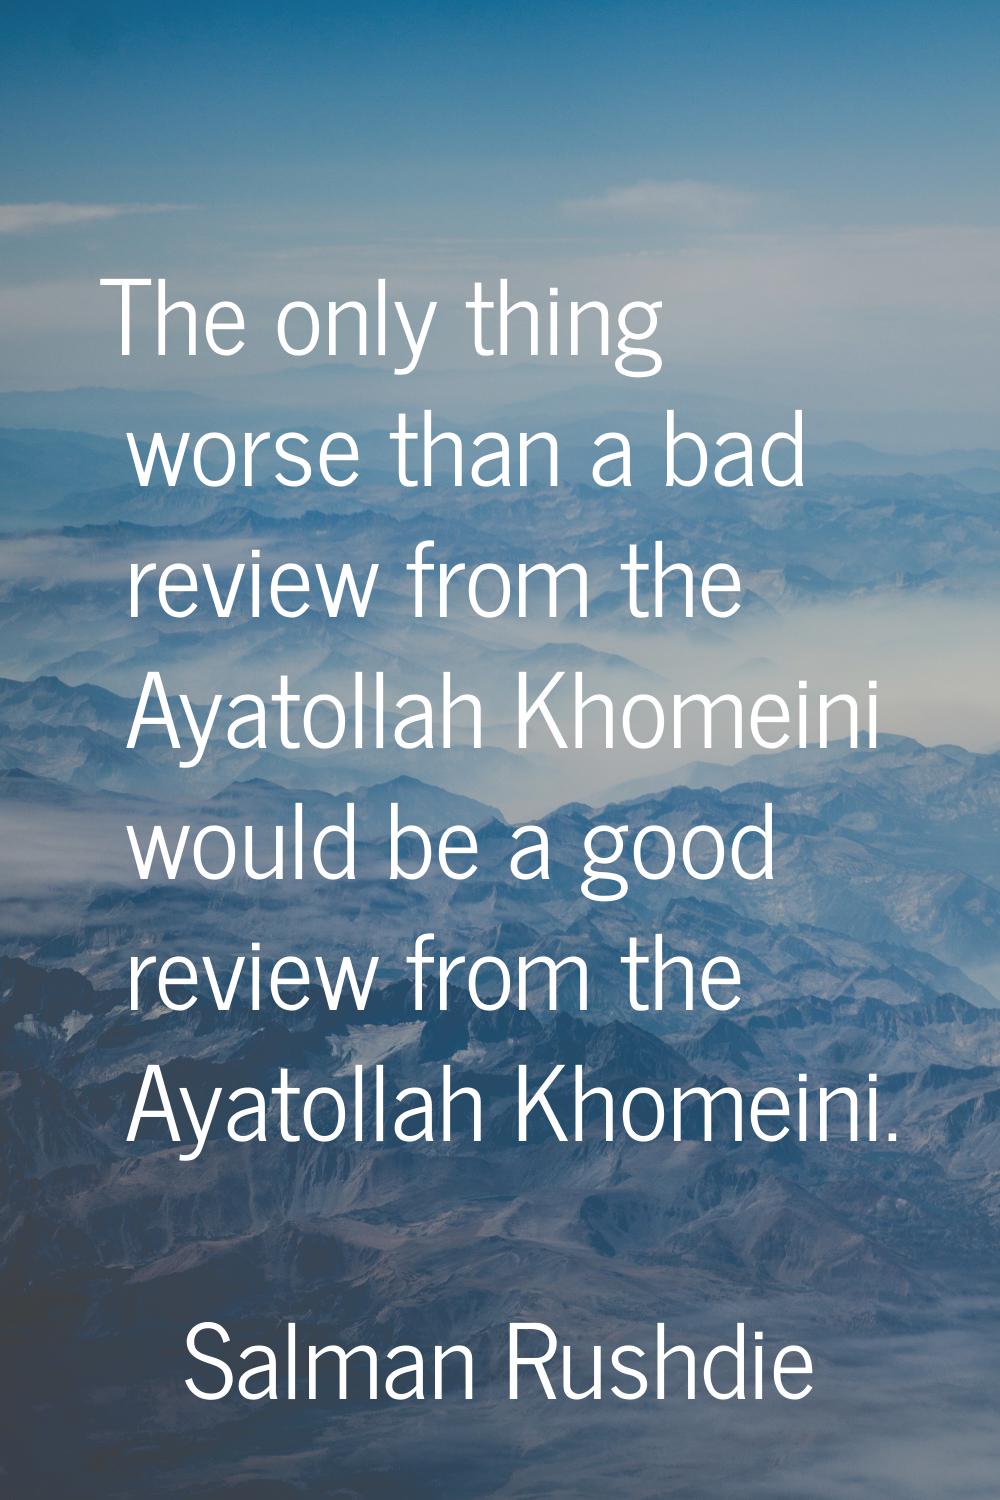 The only thing worse than a bad review from the Ayatollah Khomeini would be a good review from the 